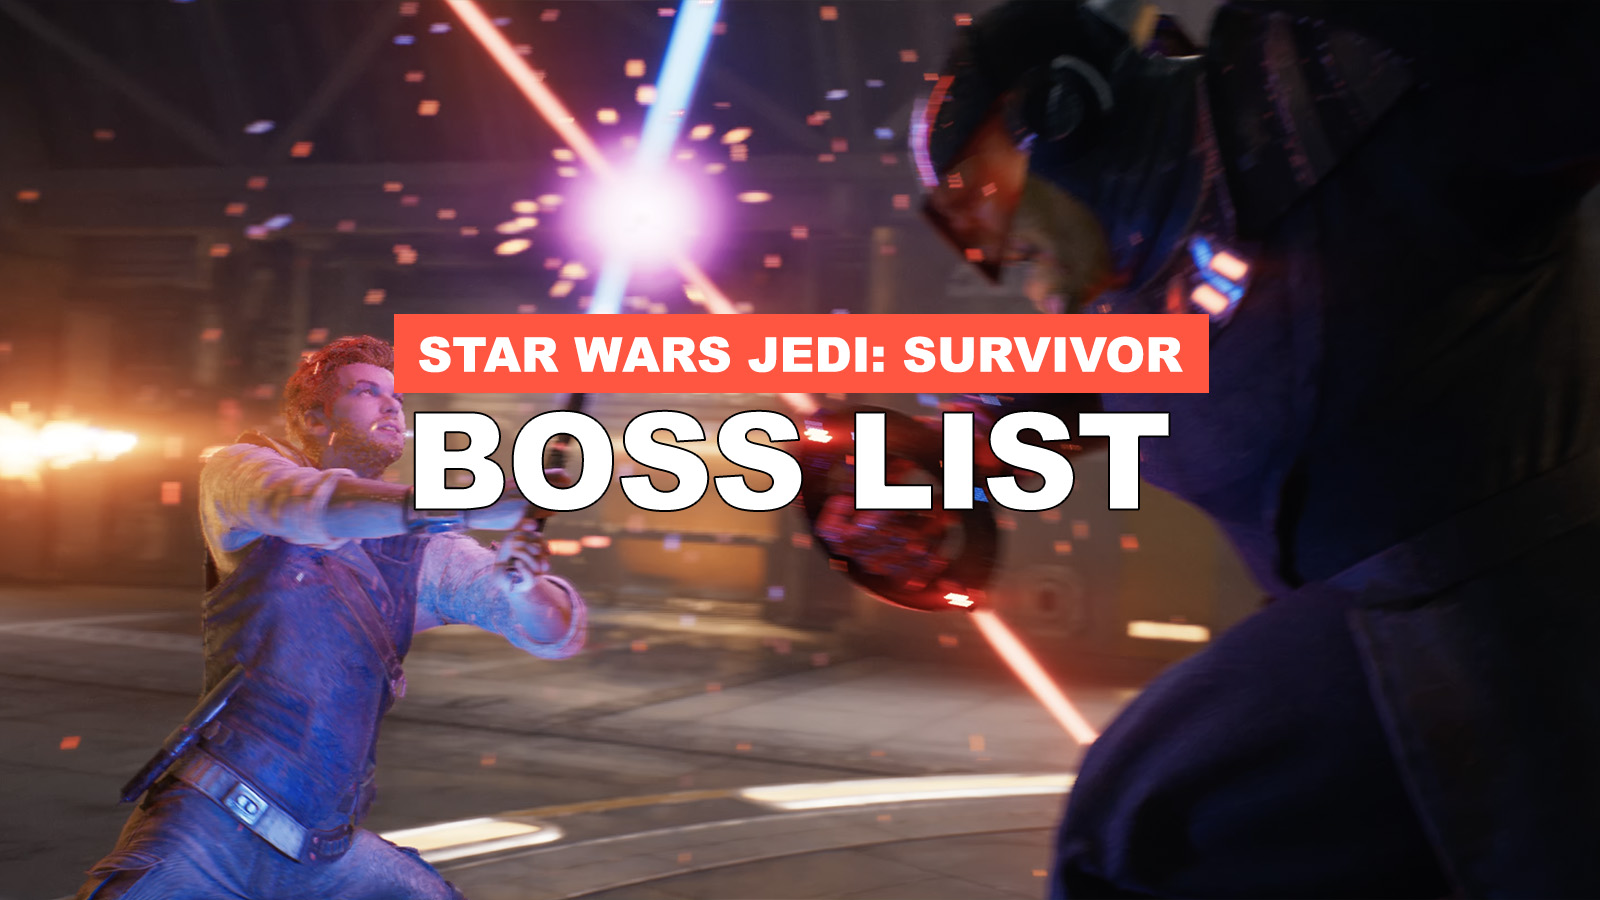 Star Wars Jedi: Survivor Boss List: How Many Are There?